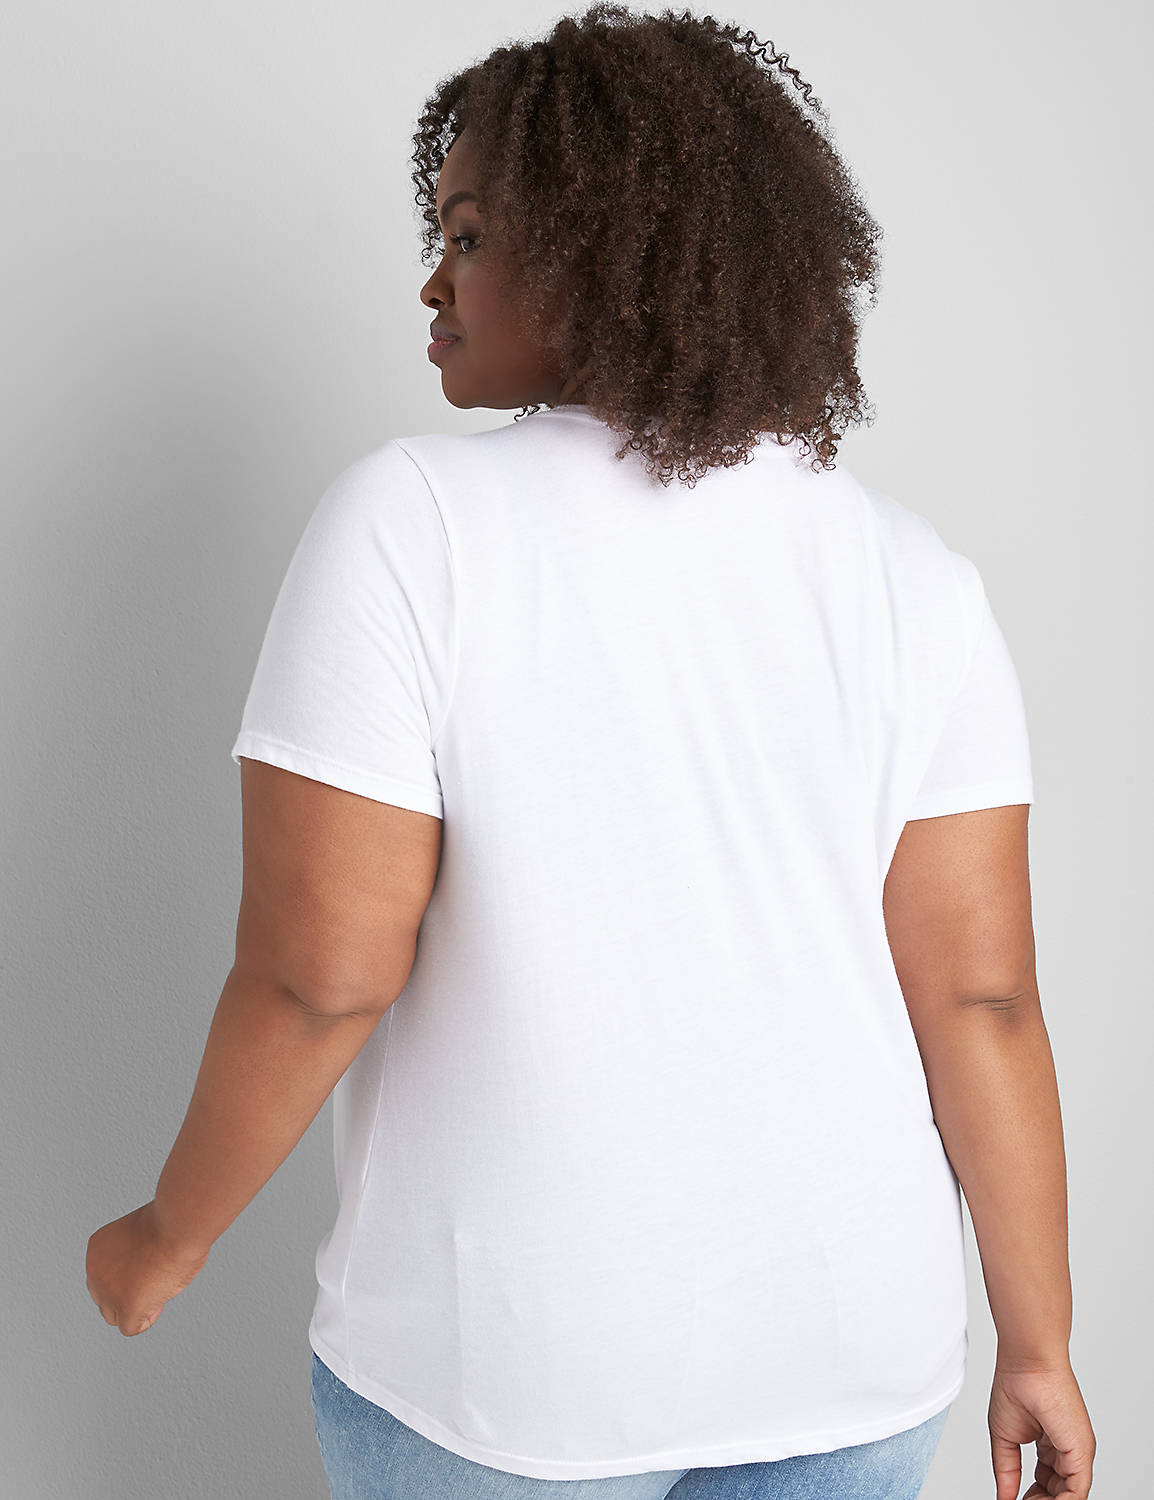 Beauty Has No Skin Tone Graphic Tee Product Image 2